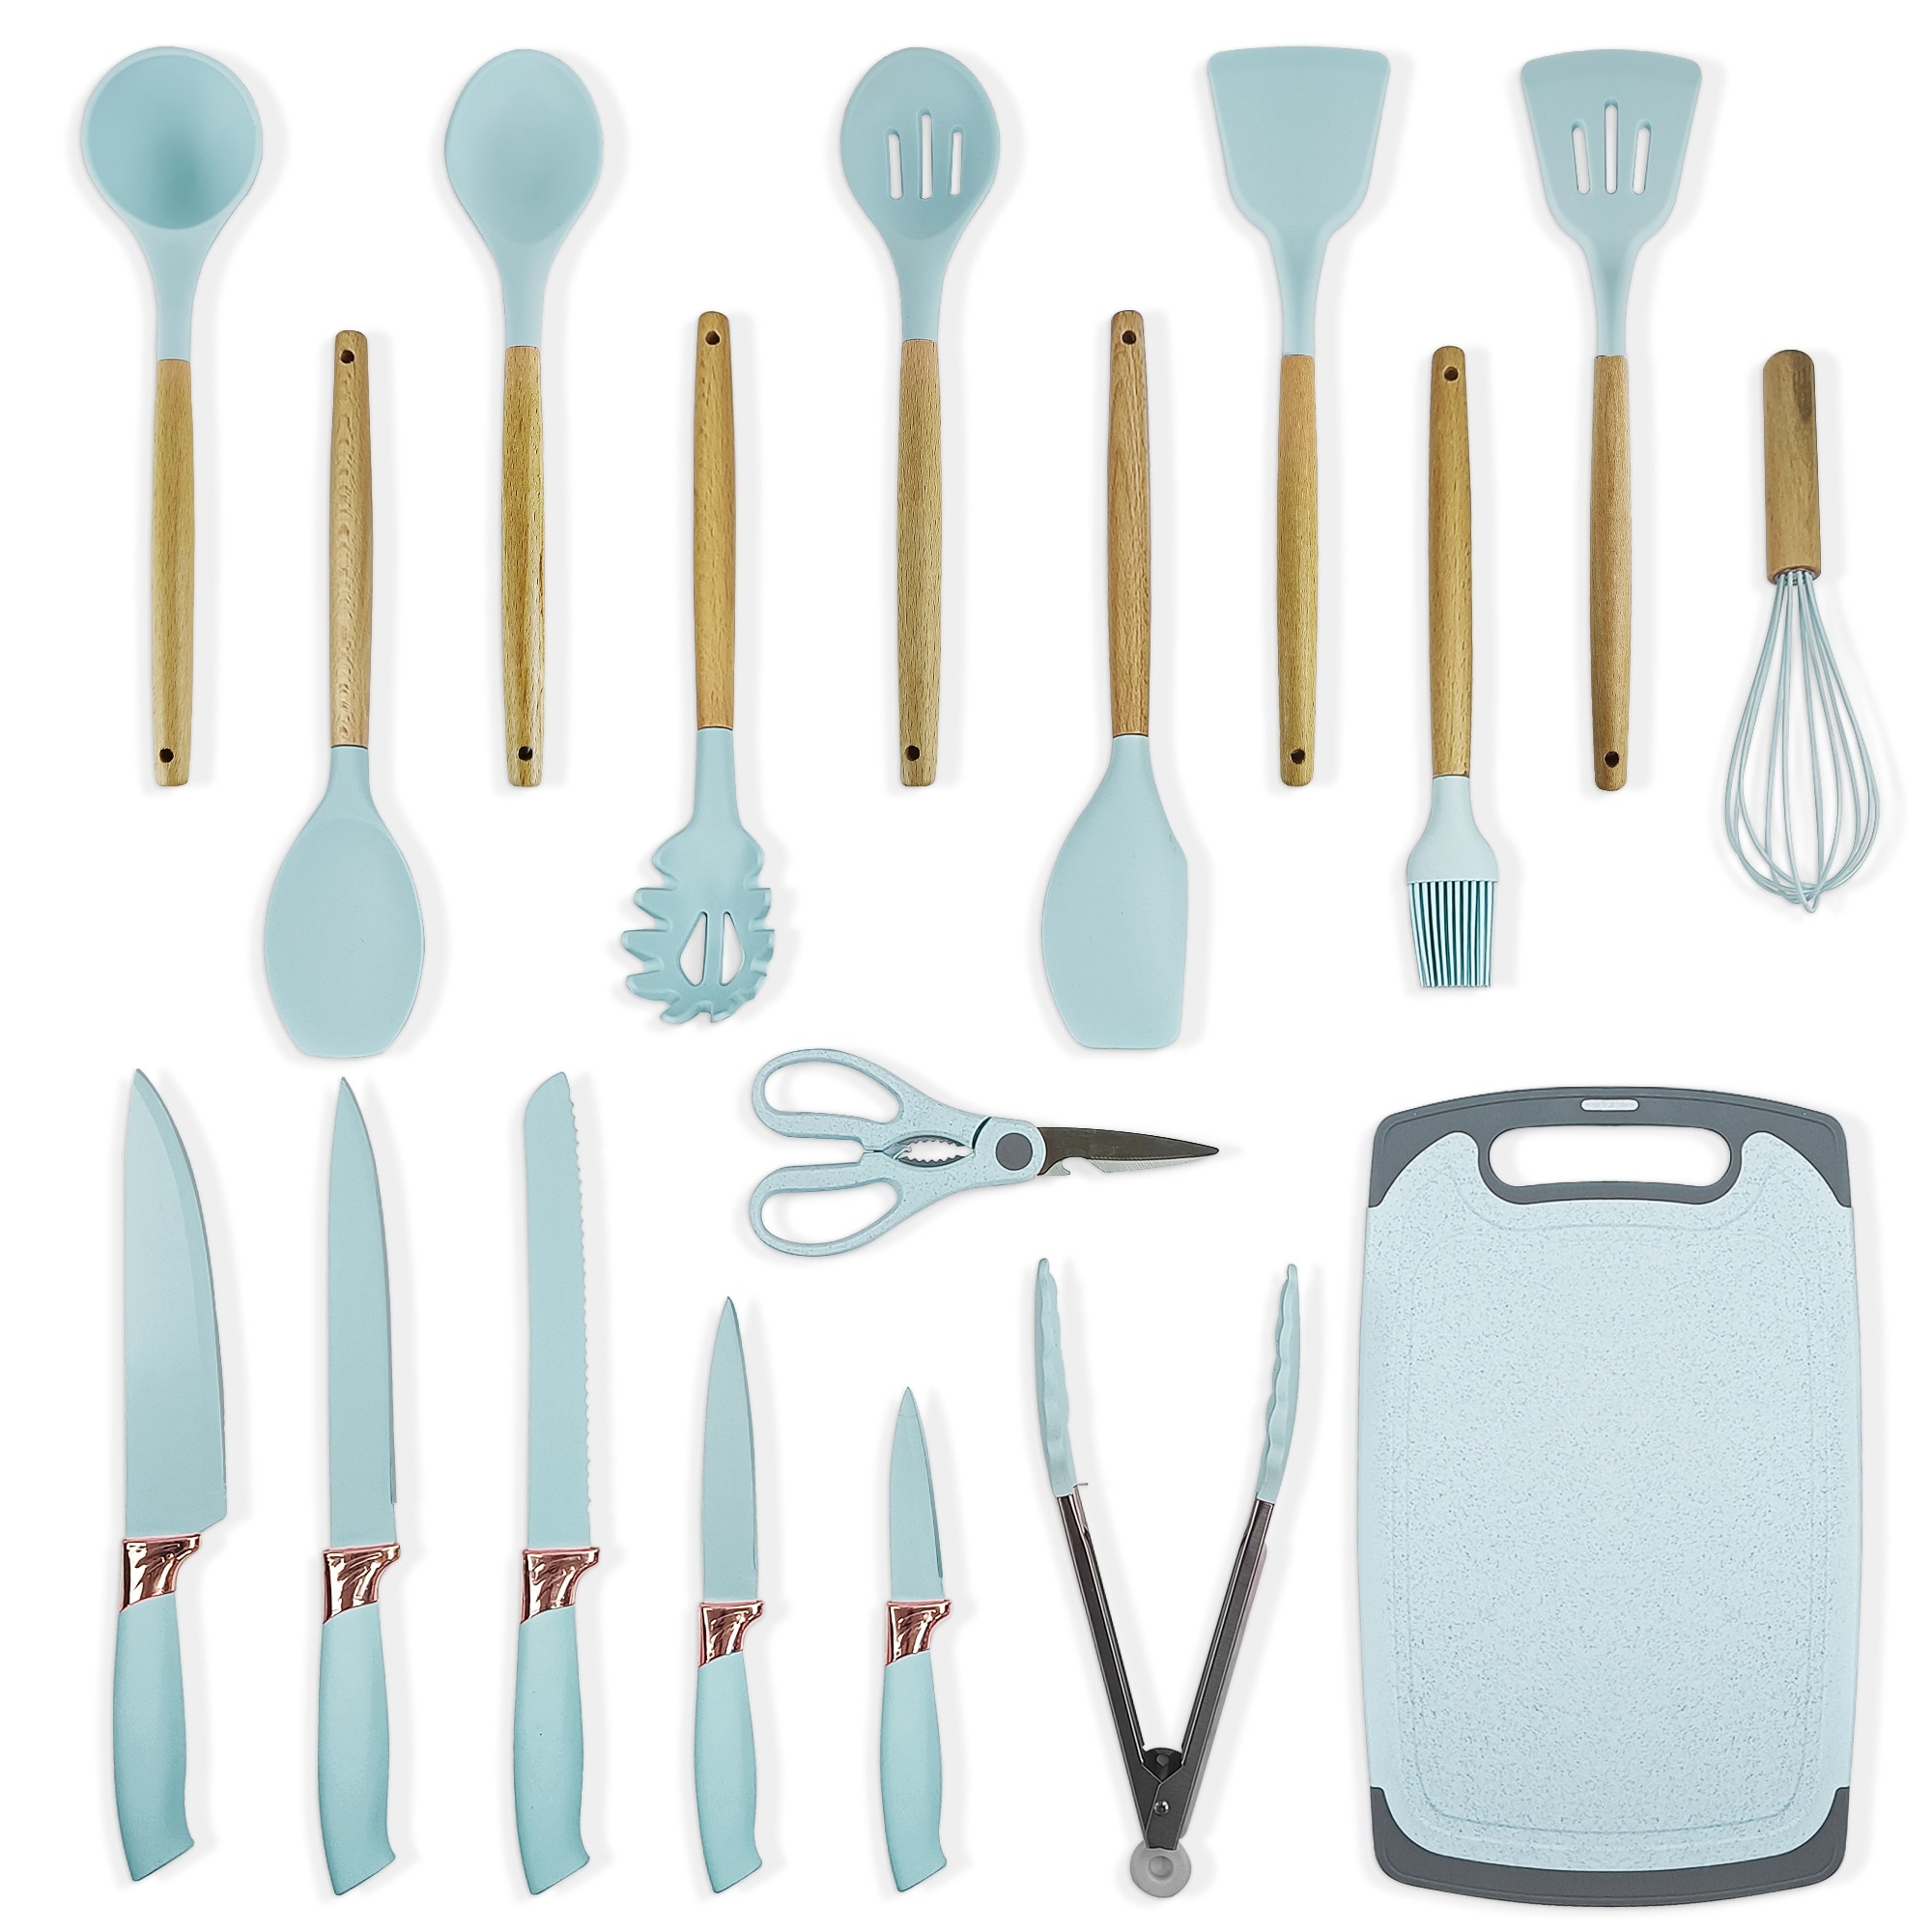 https://ak1.ostkcdn.com/images/products/is/images/direct/03fdb149a3042994cf2792af70f647780db7b147/19-piece-Non-stick-Silicone-Assorted-Kitchen-Utensil-Set.jpg